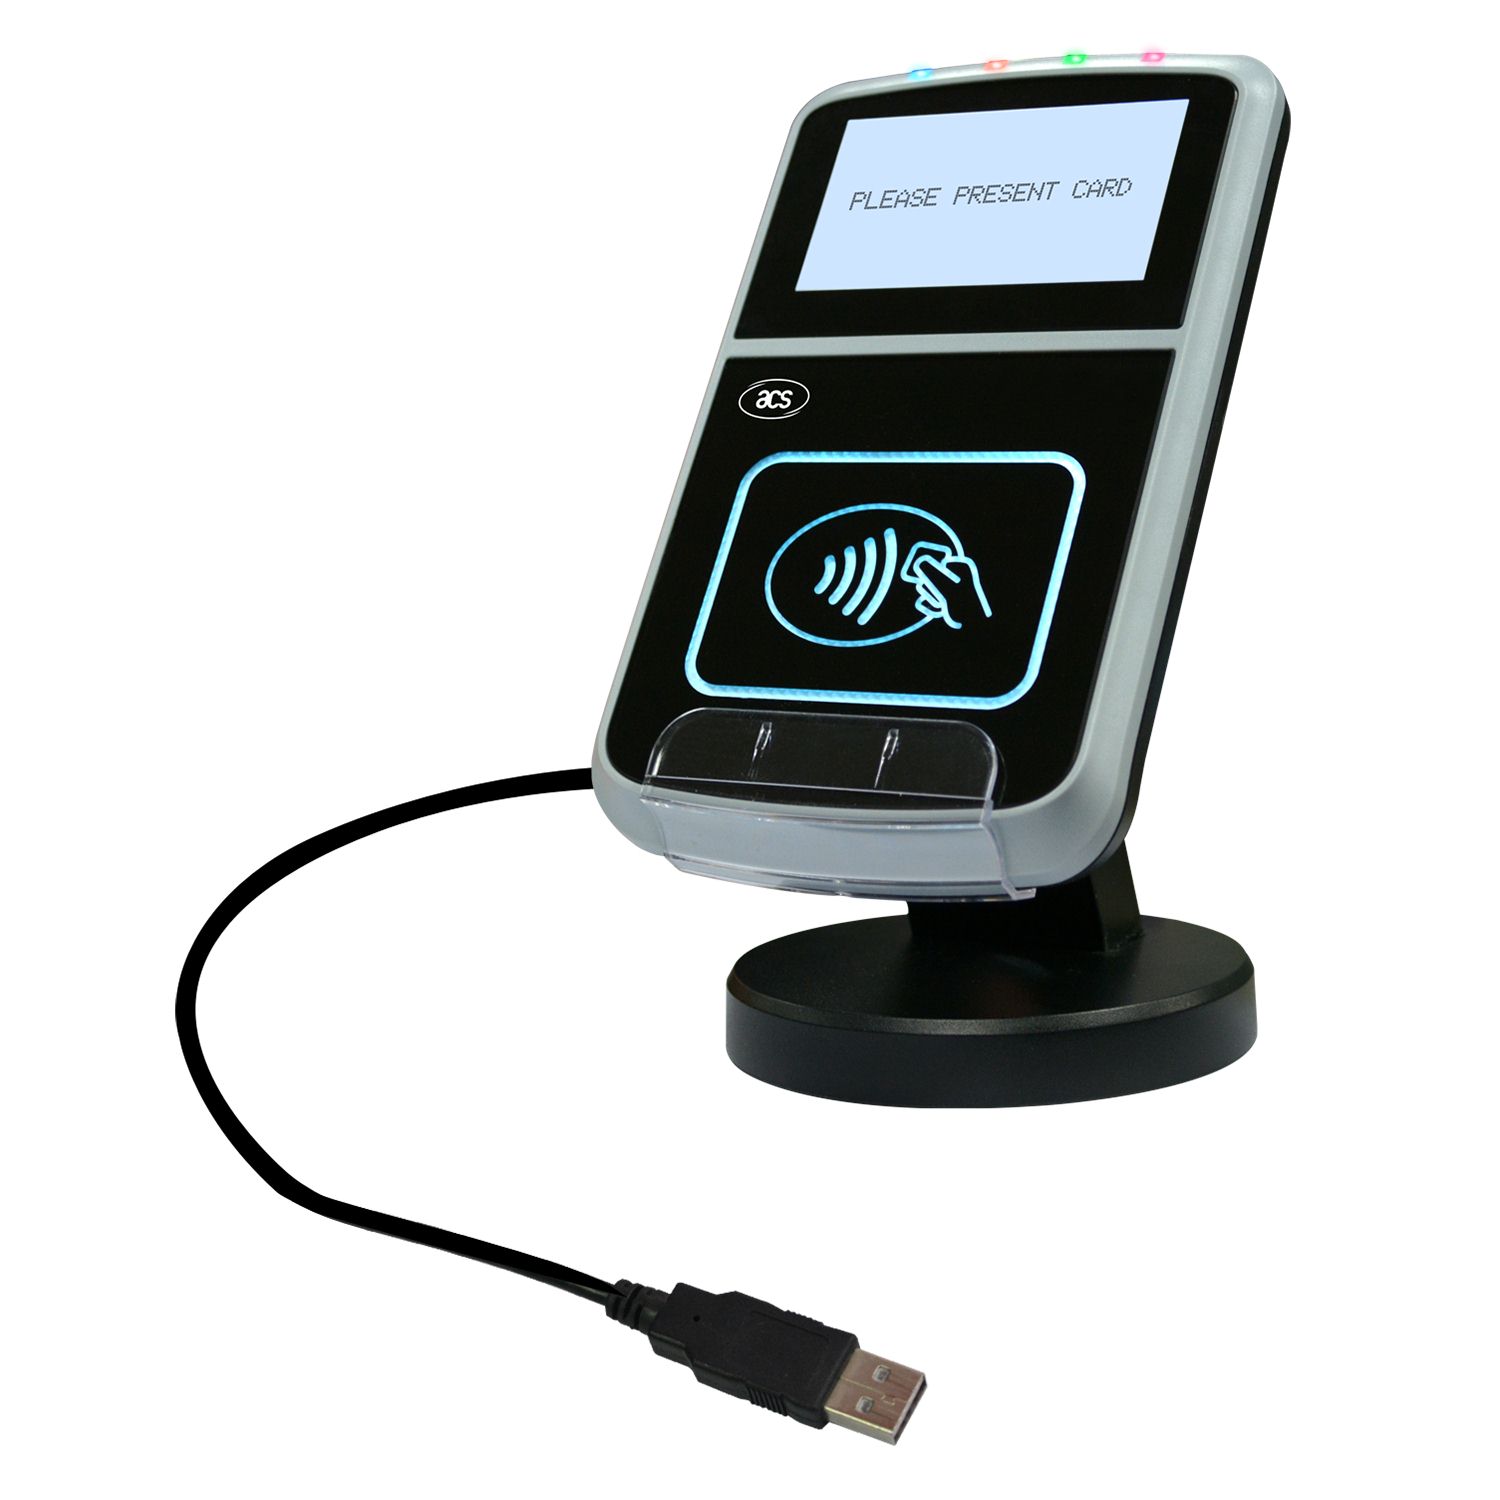 ACR123U contactless bus nfc Reader Featured Image